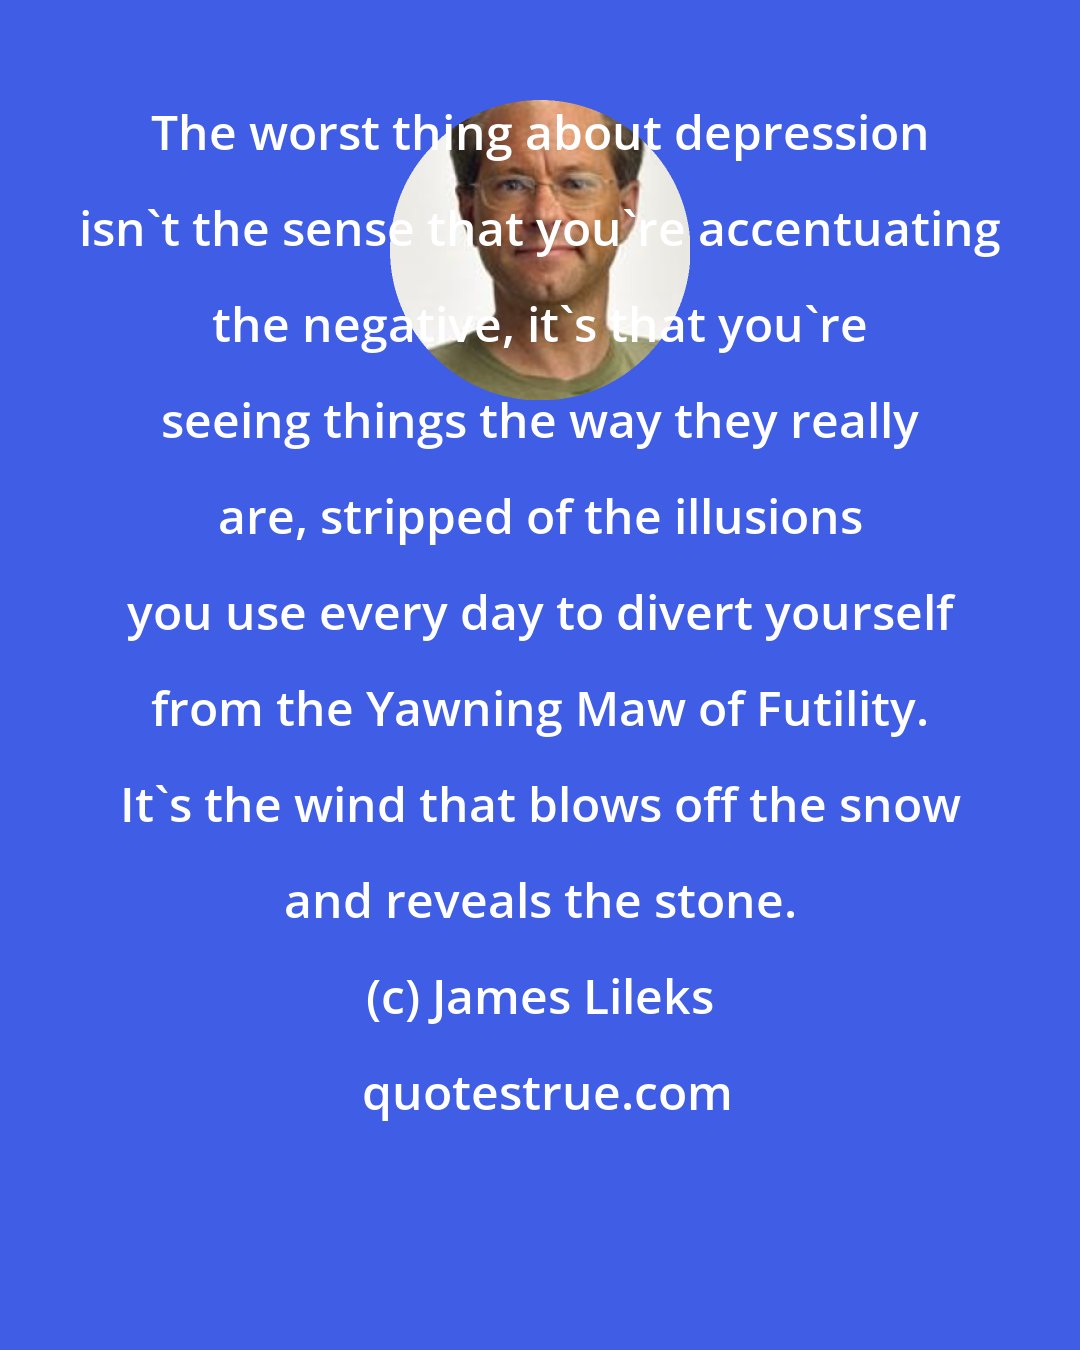 James Lileks: The worst thing about depression isn't the sense that you're accentuating the negative, it's that you're seeing things the way they really are, stripped of the illusions you use every day to divert yourself from the Yawning Maw of Futility. It's the wind that blows off the snow and reveals the stone.